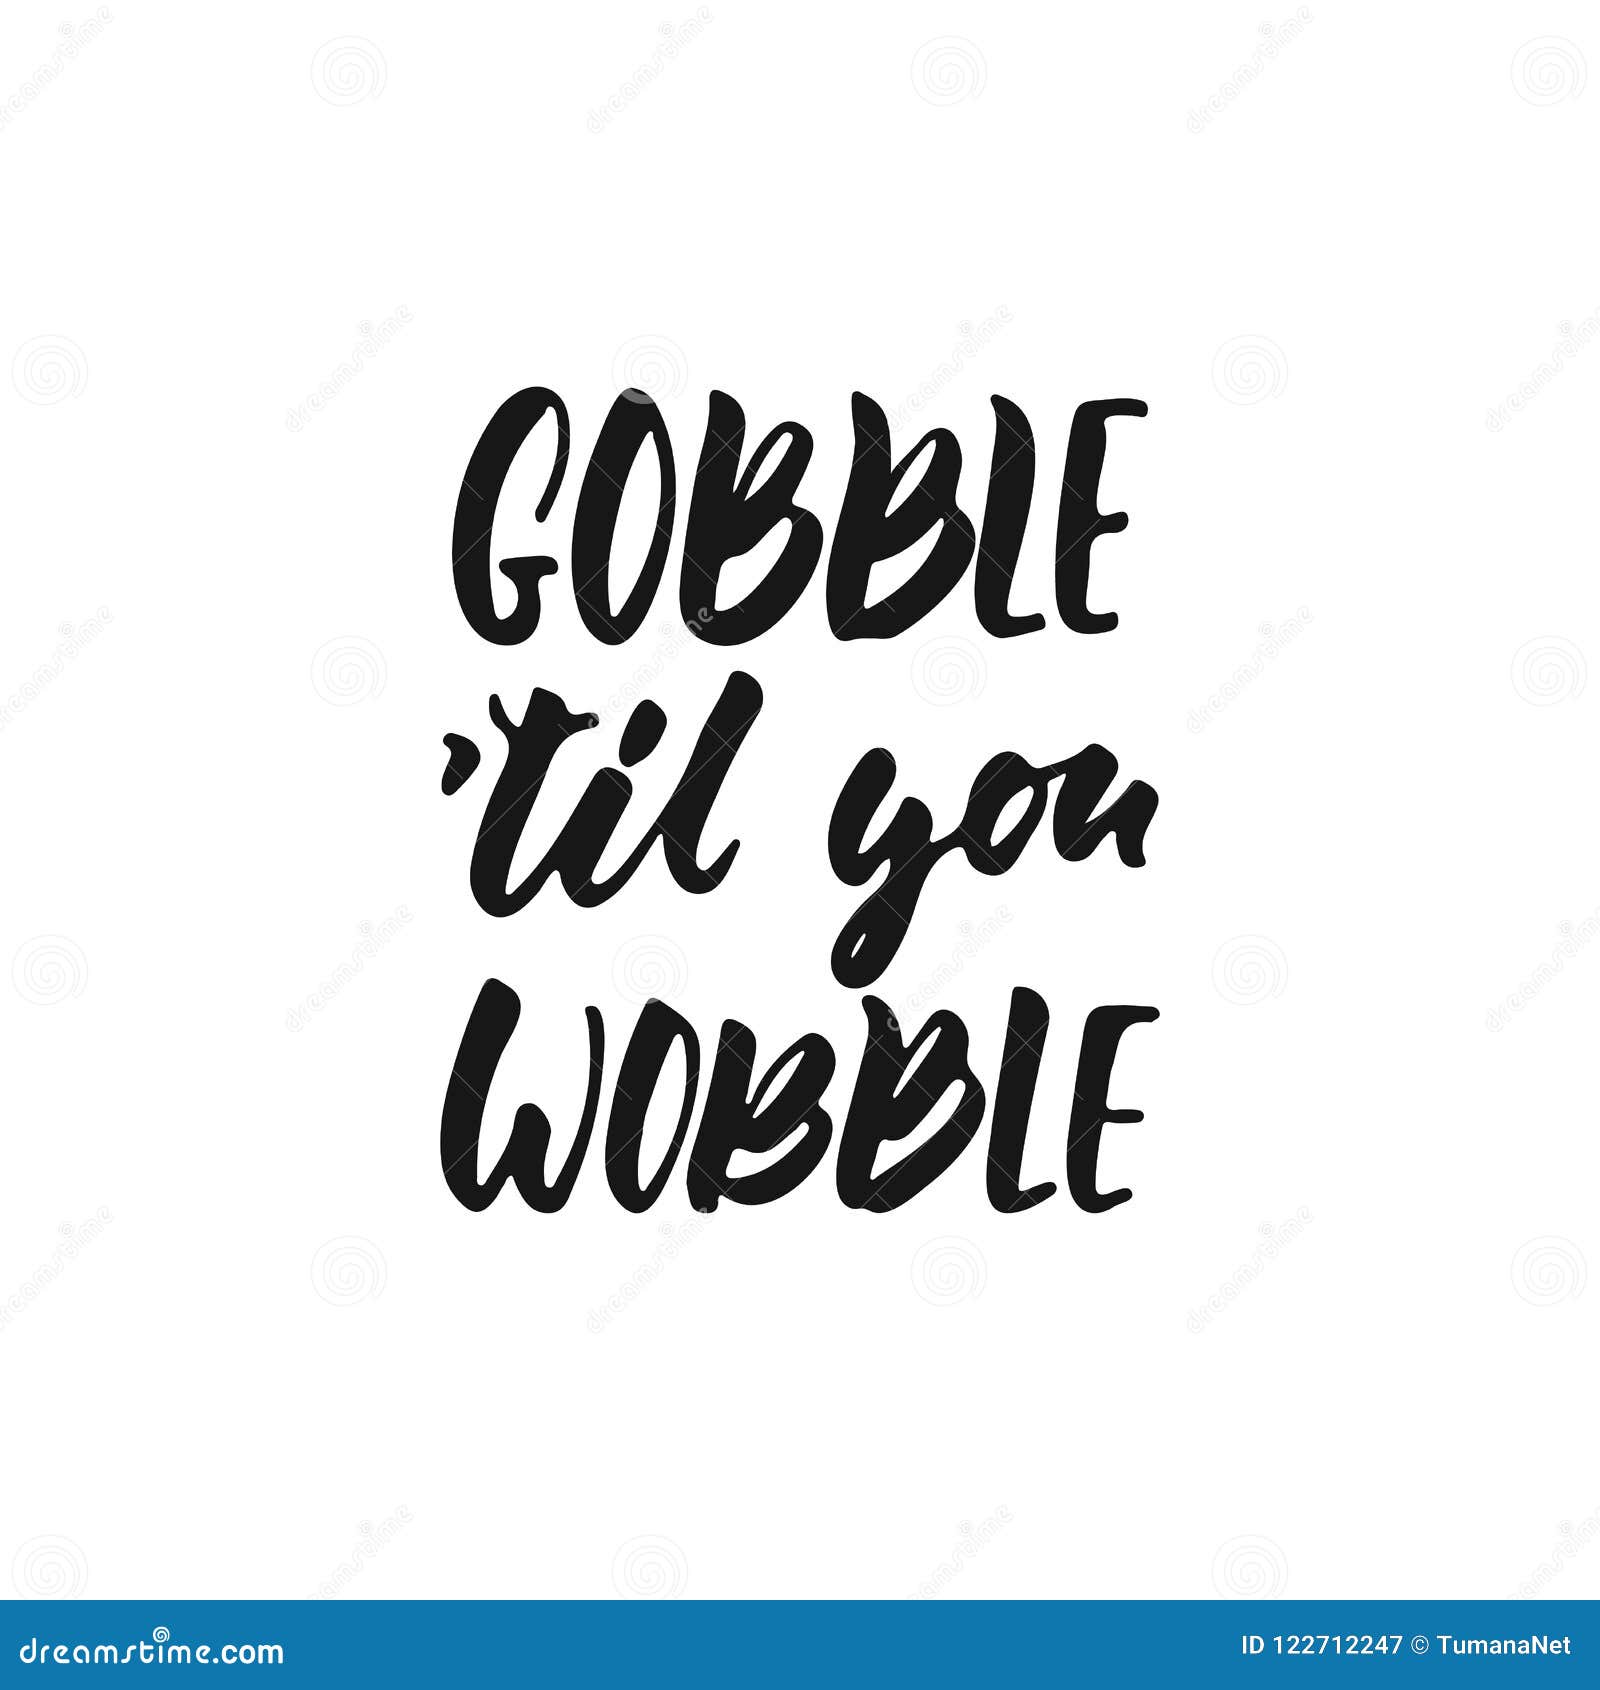 gobble til you wobble - hand drawn autumn seasons thanksgiving holiday lettering phrase  on the white background